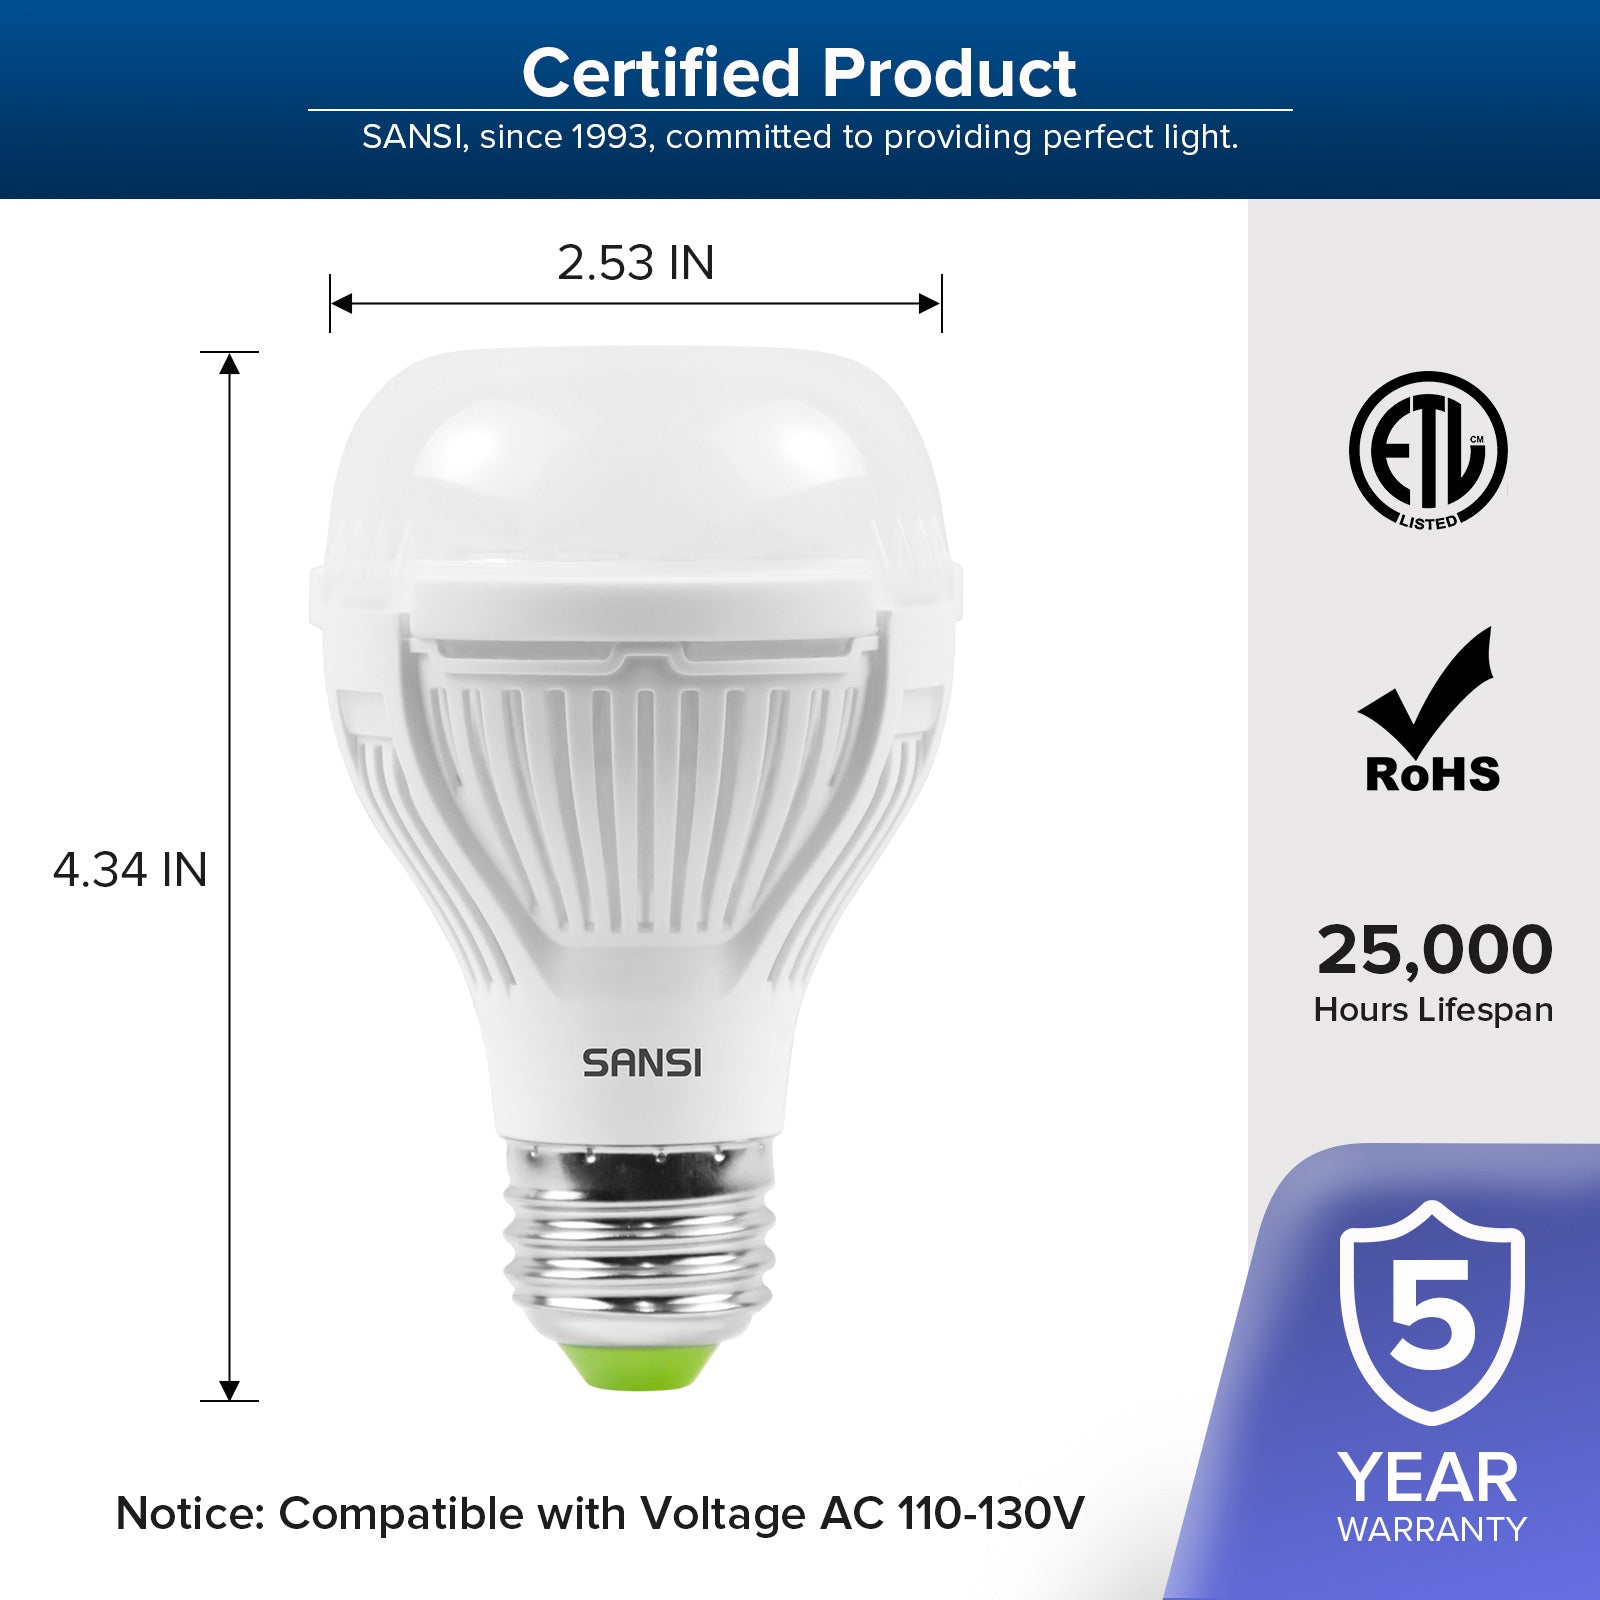 Upgraded A19 13W led light bulb with energy efficient for bedroom has ROHS certification, 25,000 hours lifespan